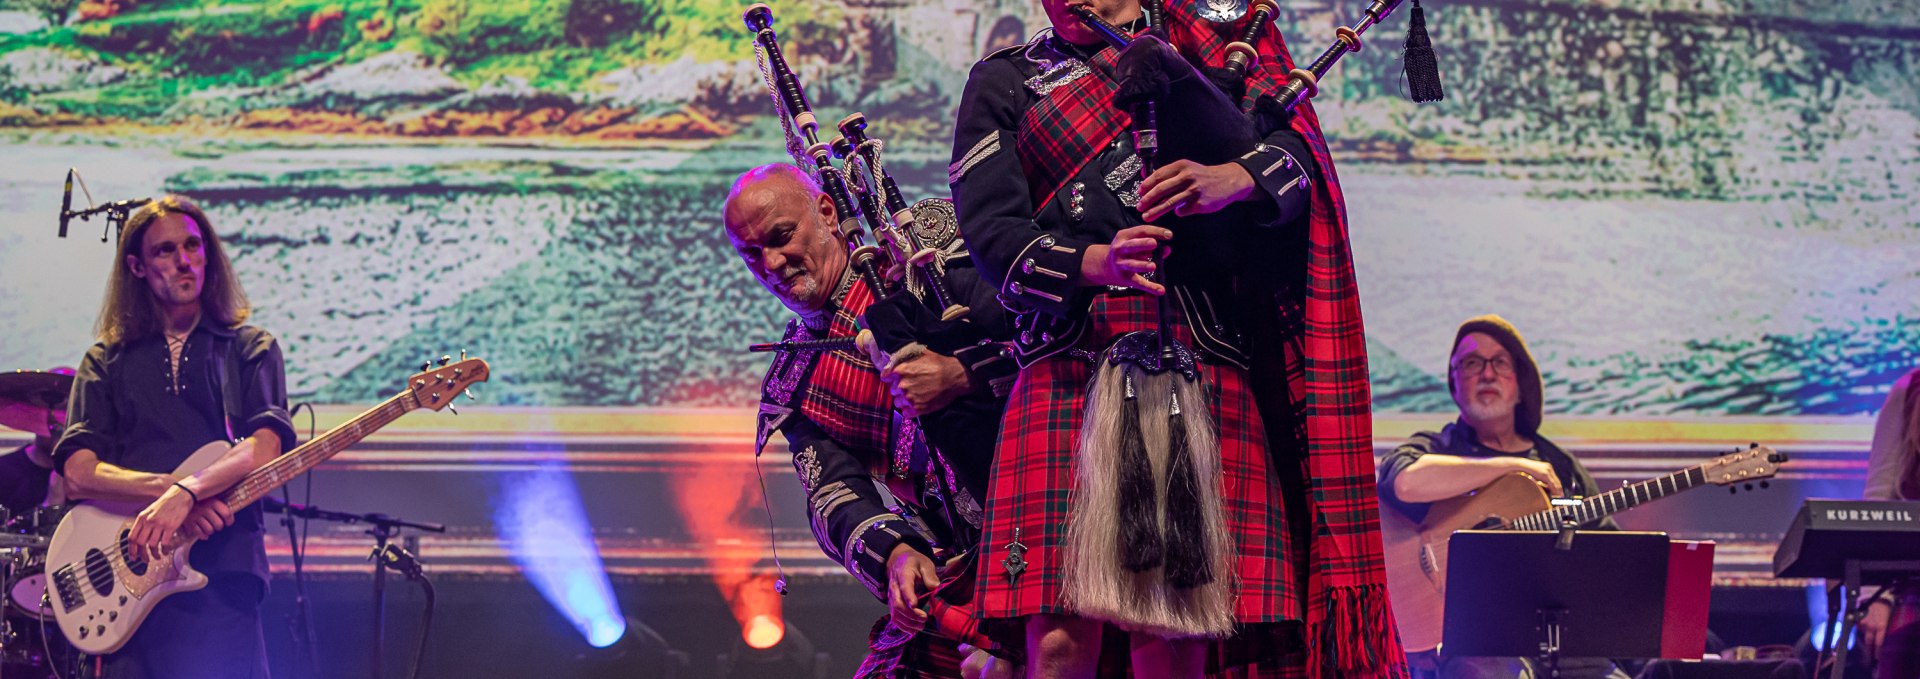 Welcome to a mixture of "Trooping the Color", love story, catchy music and impressive images from the Scottish Highlands., © art.emis Entertainment GmbH